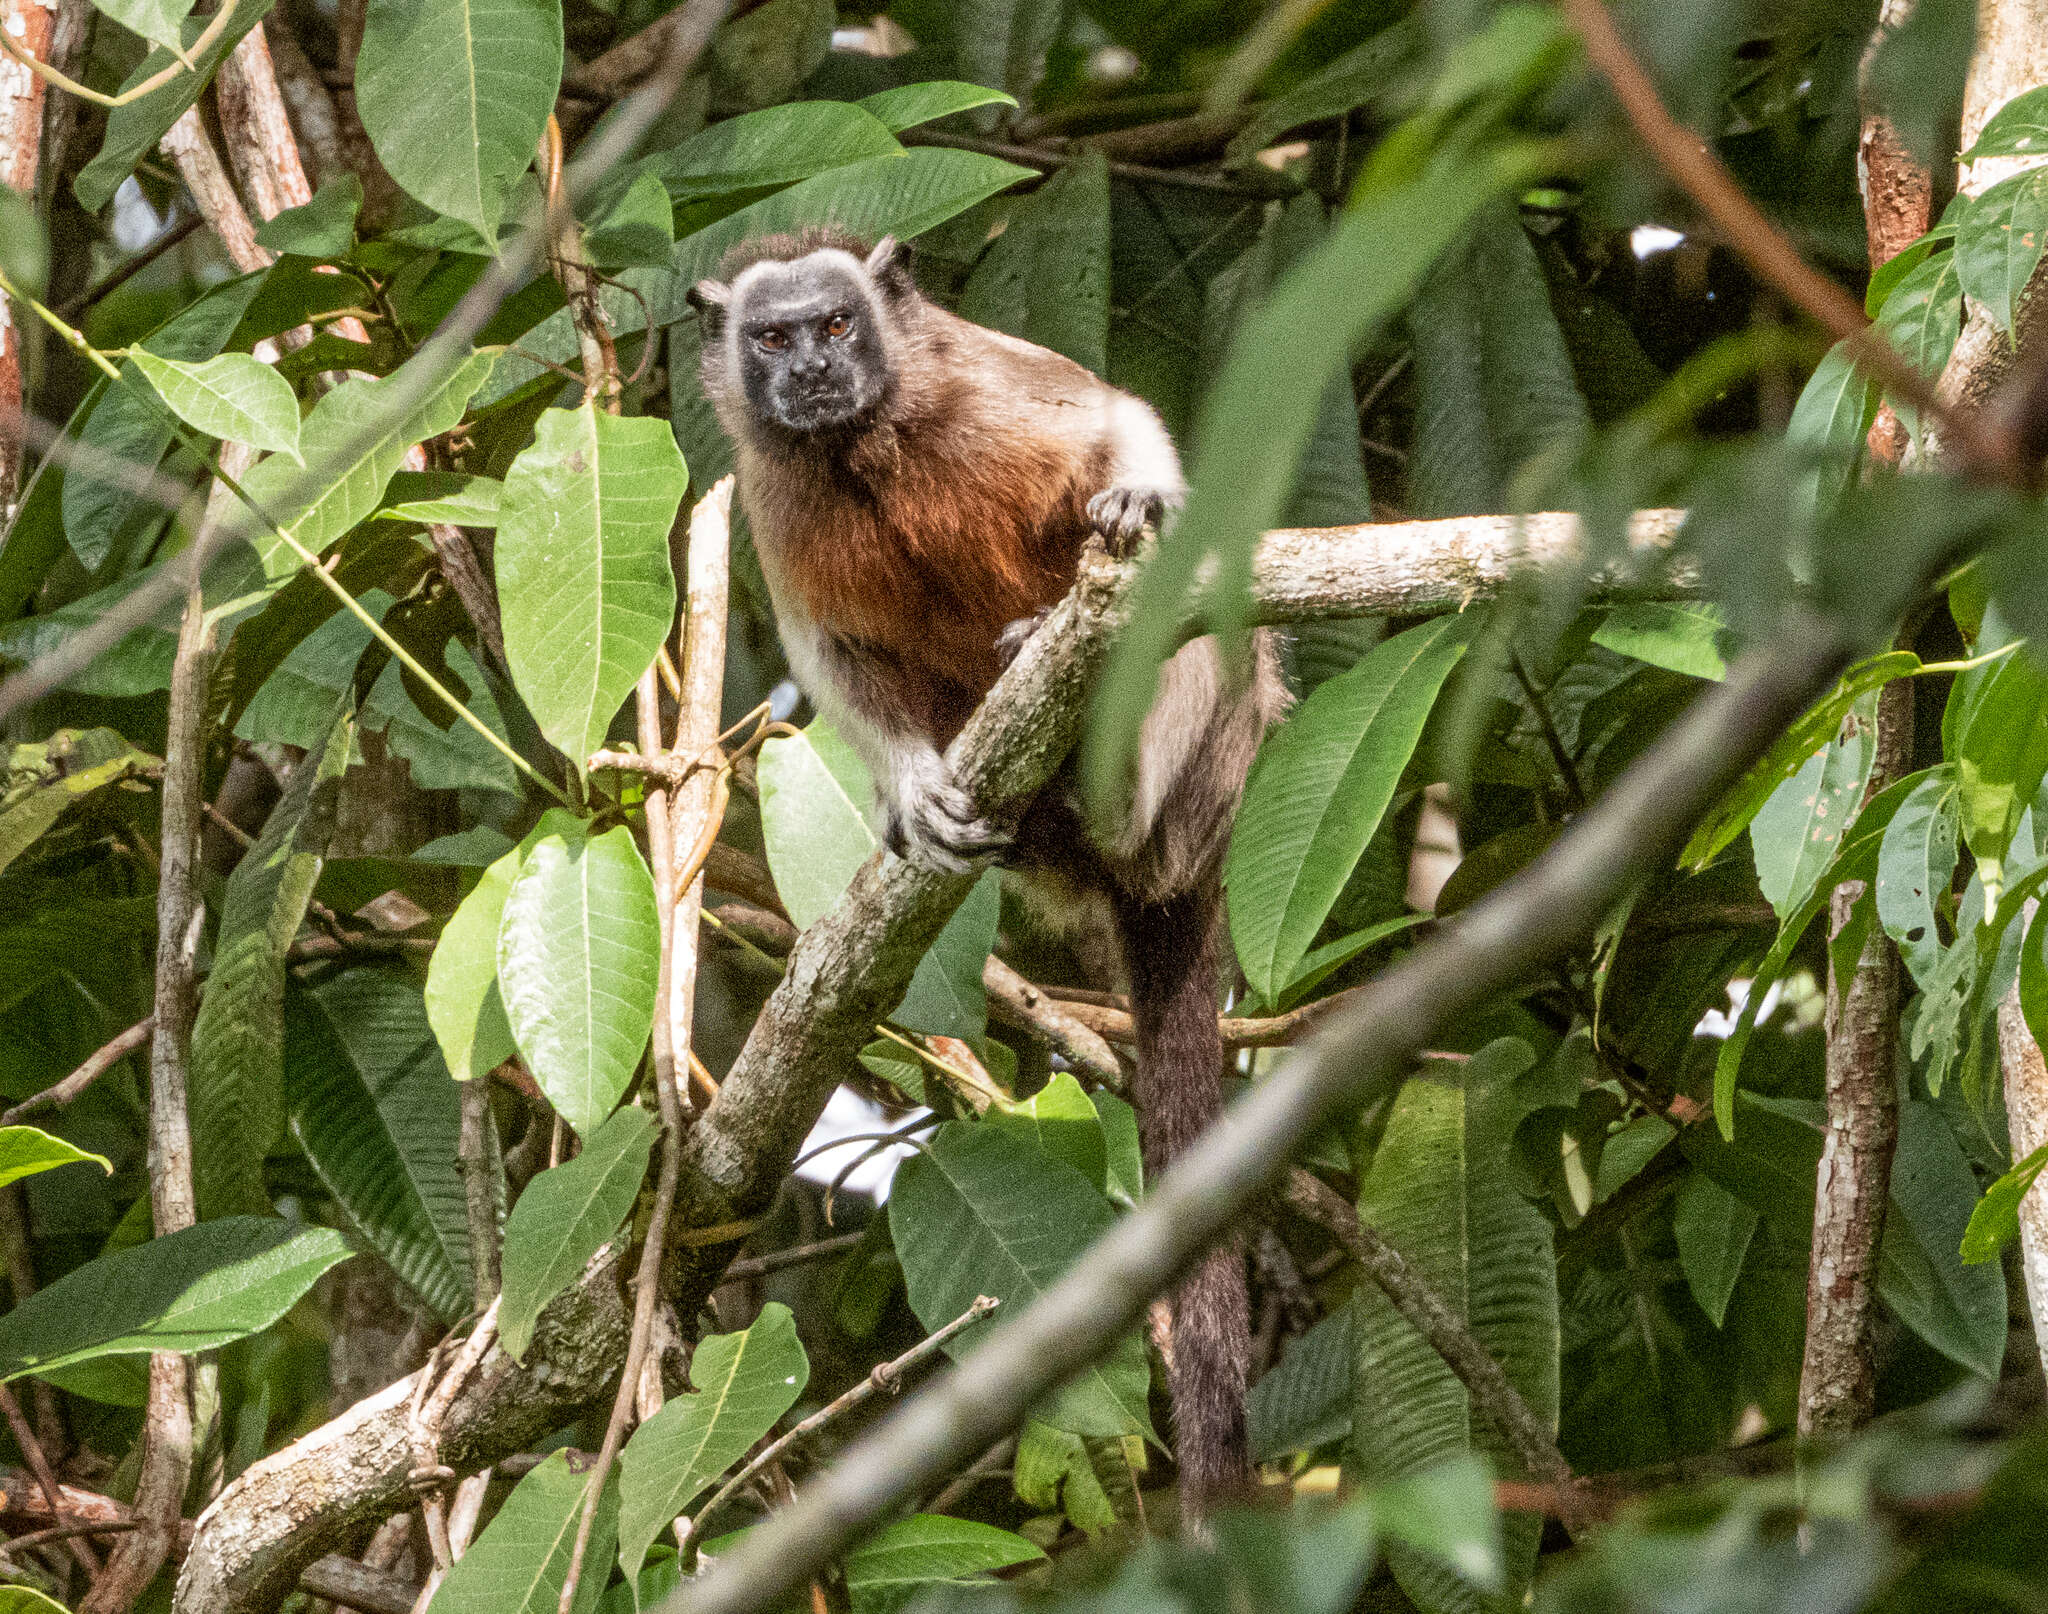 Image of Silvery-brown Bare-face Tamarin